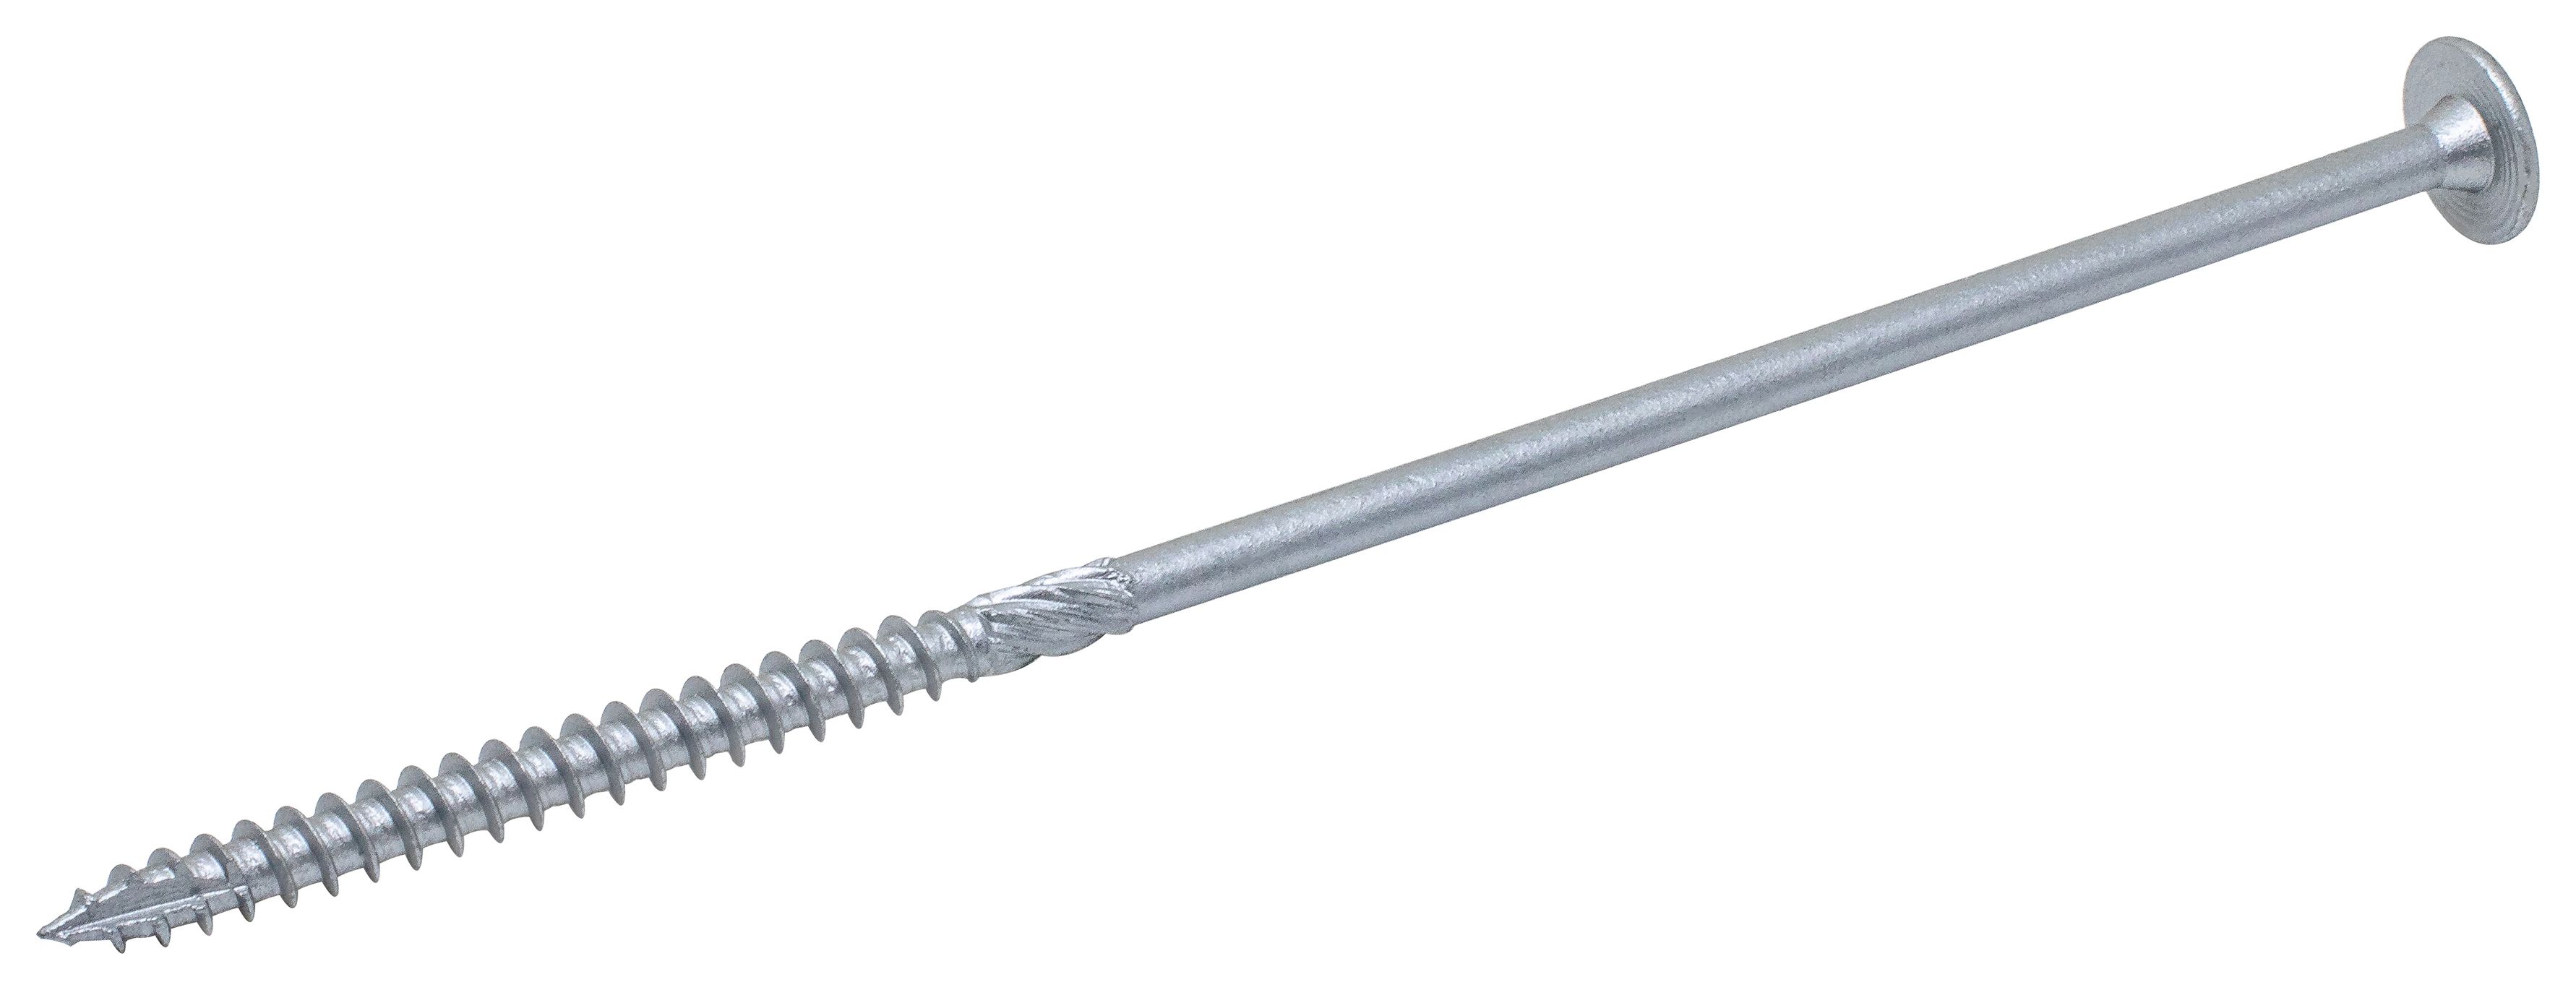 Image of Wickes Timber Drive Tx Washer Head Silver Screw - 7x200mm Pack Of 25